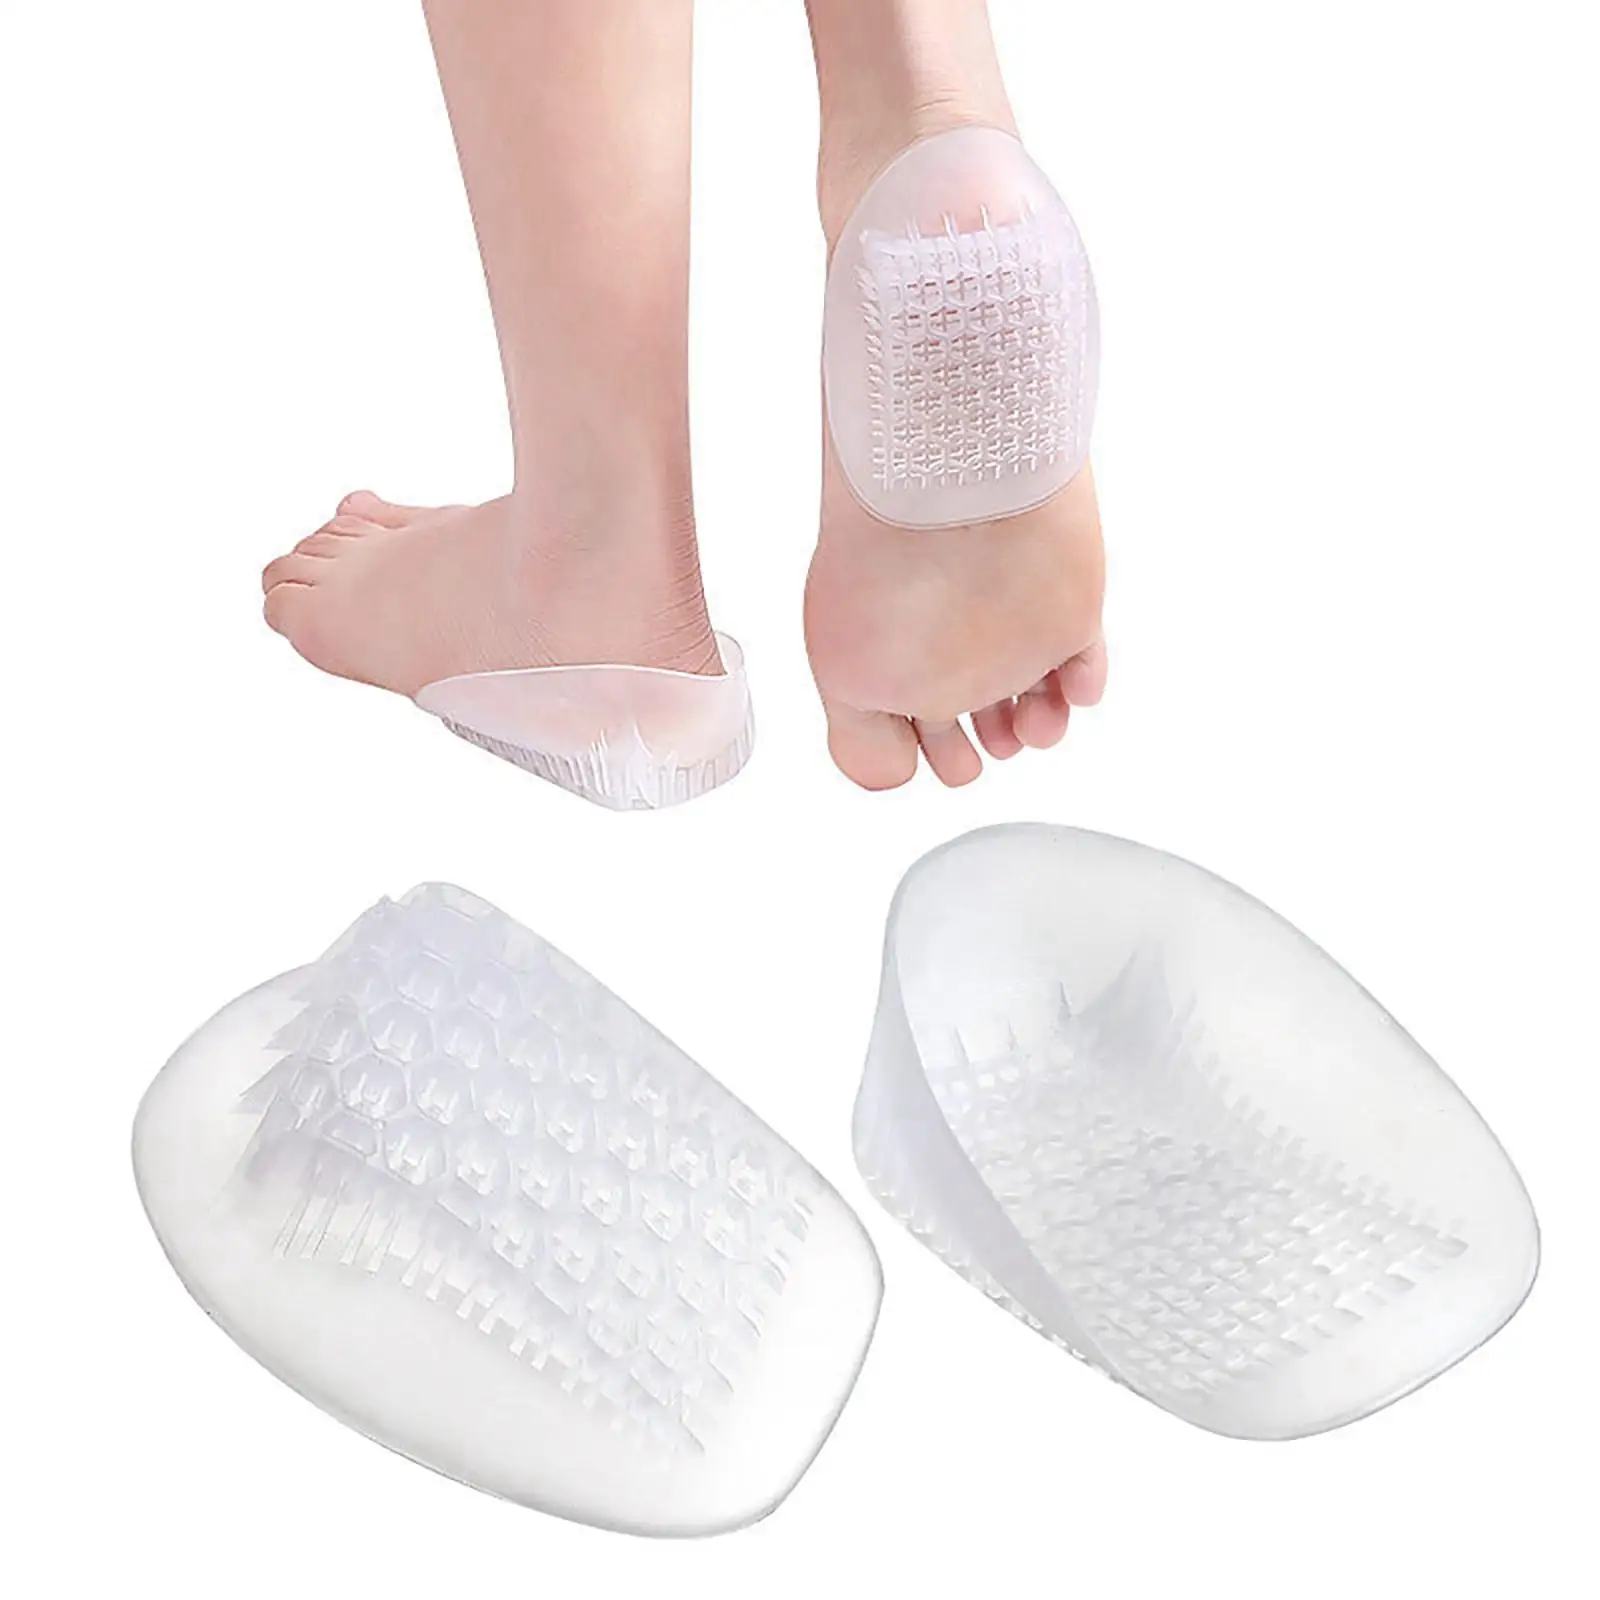 1 Pair U-Shaped Gel Heel Cups Reduce Swelling Shock Absorption Soft Inserts for Plantar Fasciitis Heel Cracking Achilles Pain